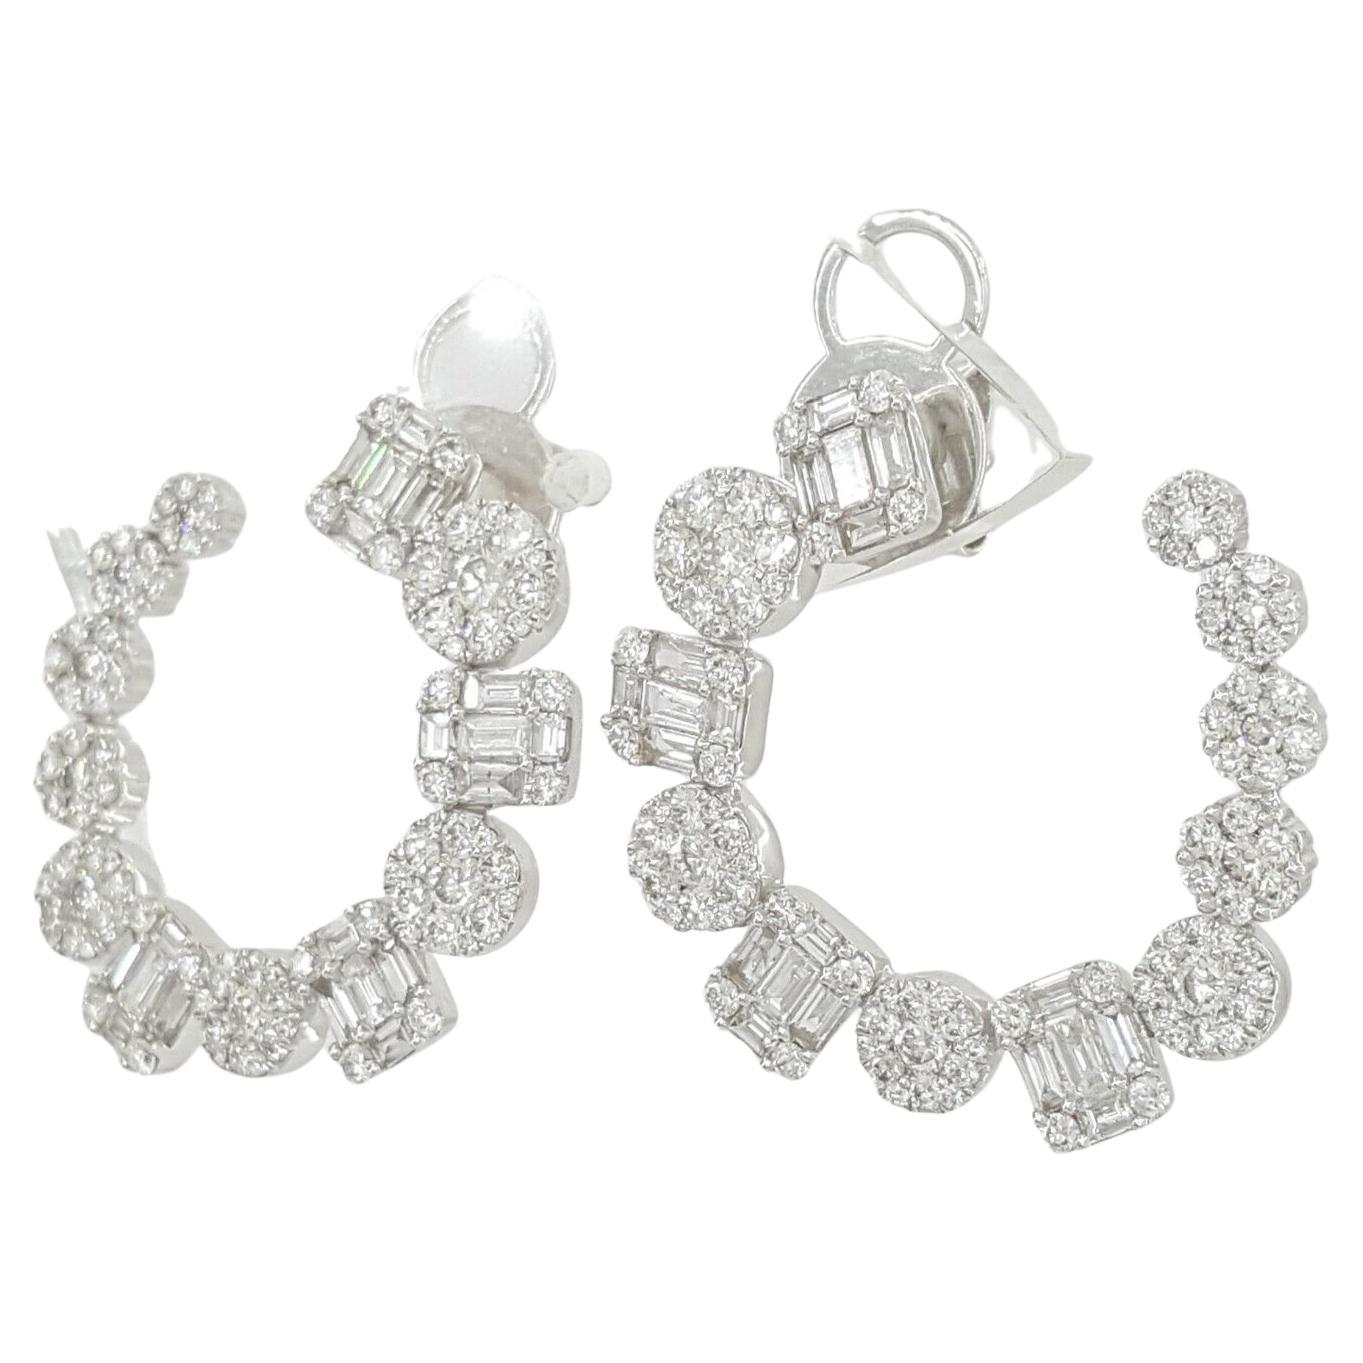 18K White Gold 3.42 ct Baguette & Round Brilliant Cut Diamond Sideways Hoop Earrings. 

There are 40 Natural Baguette Brilliant Cut Diamonds weighing approximately 1.1 ct total weight & 192 Natural Round Brilliant Cut Diamonds weighing approximately